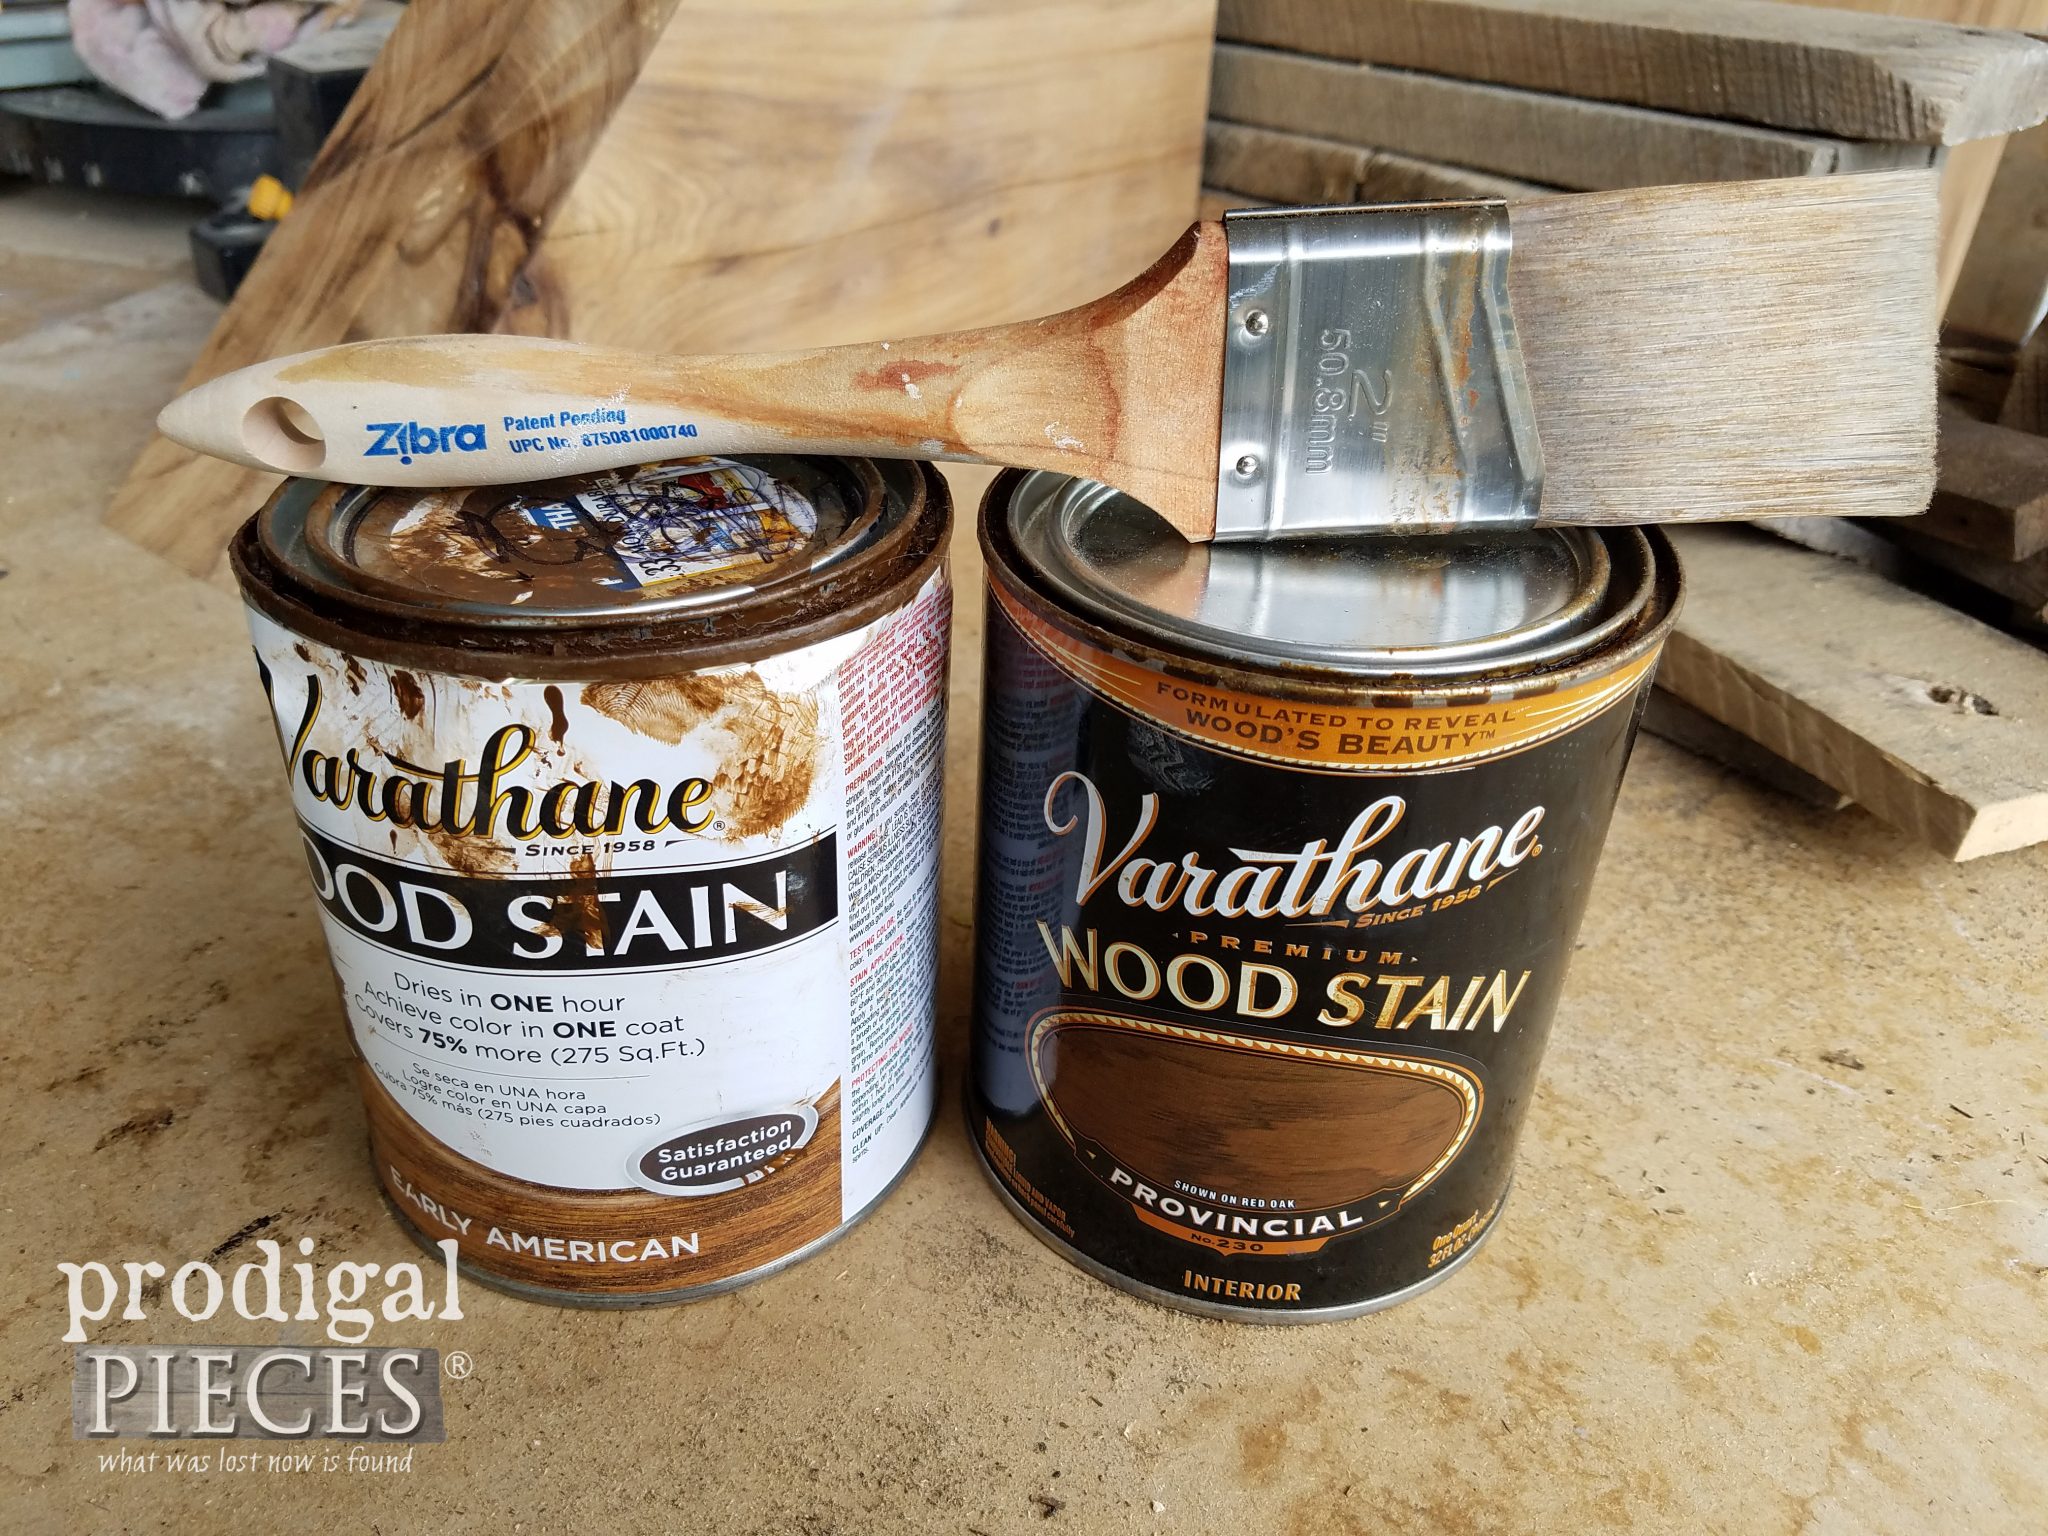 Zibra Brush and RustOleum Stains for Farmhouse Chic Look | prodigalpieces.com